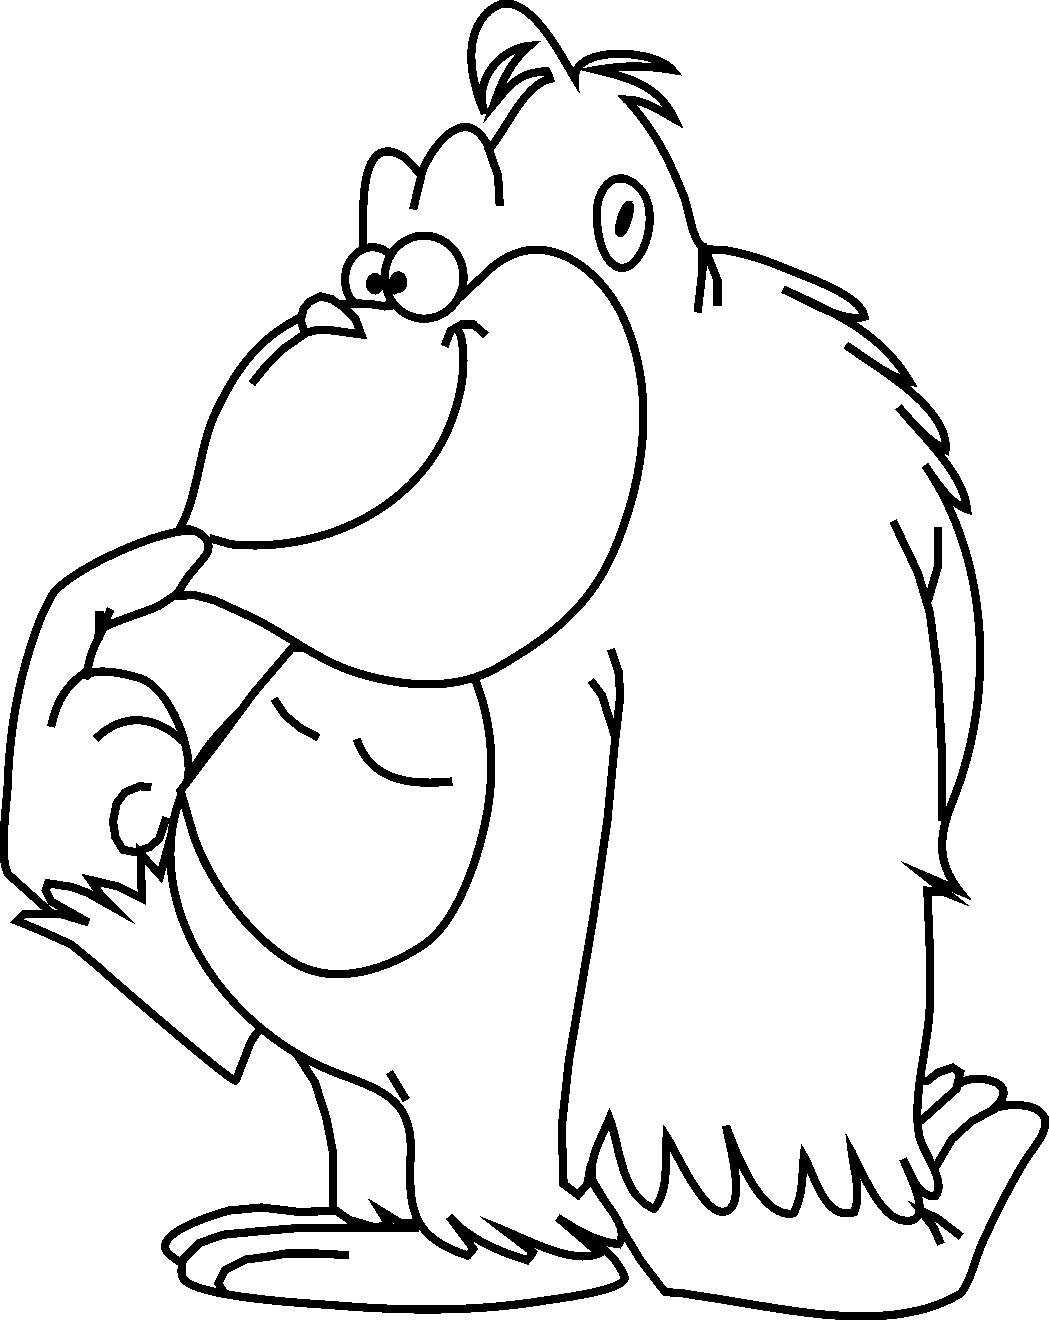 Free Coloring Pages For Kids: Cartoon animals coloring pages